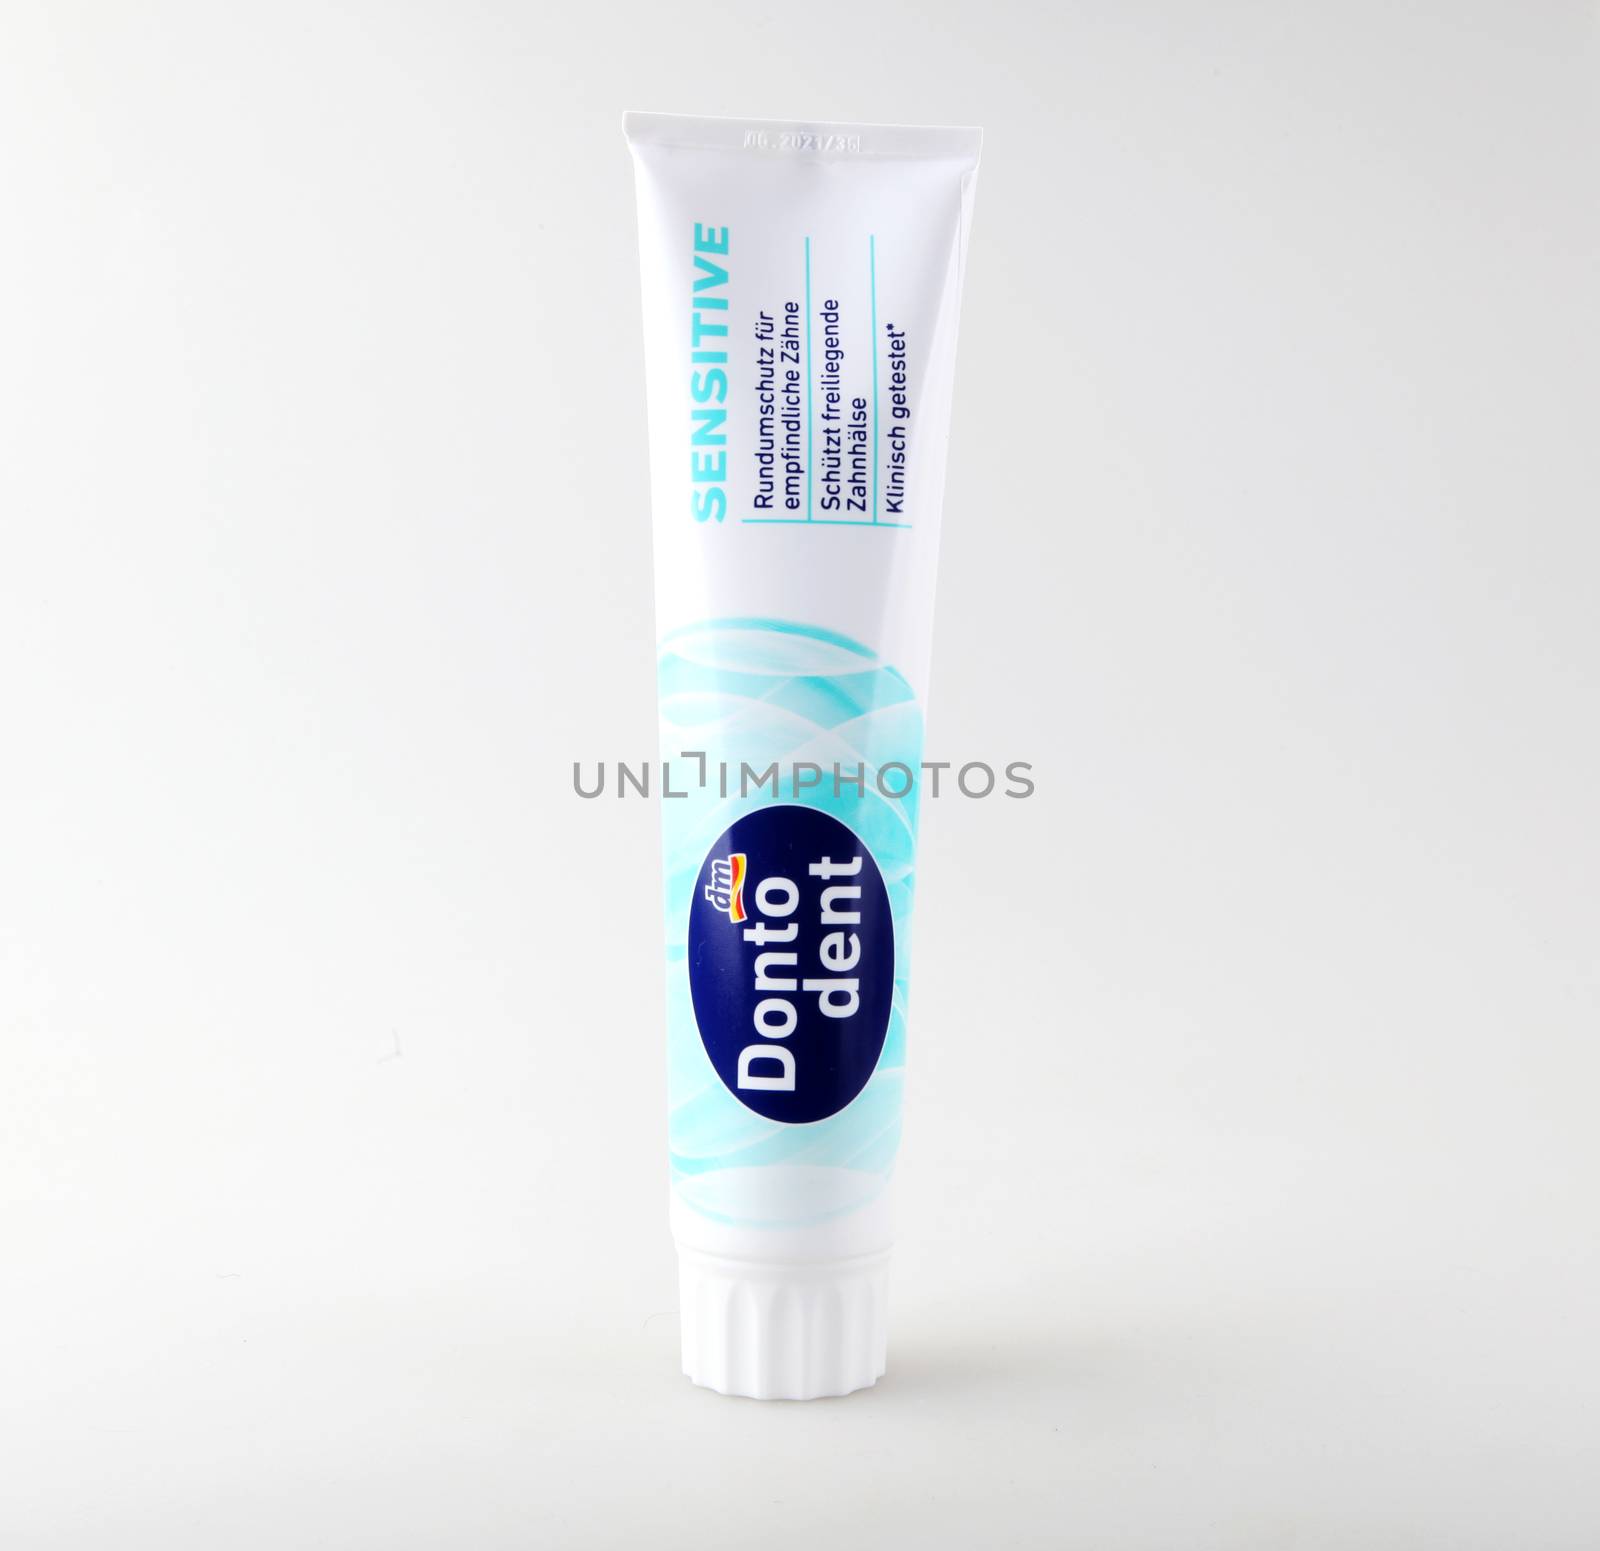 Pomorie, Bulgaria - March 01, 2019: - Dm Dontodent Sensitive Toothpaste. Dm-Drogerie Markt Is A Chain Of Retail Stores Headquartered In Karlsruhe, Germany. by nenovbrothers